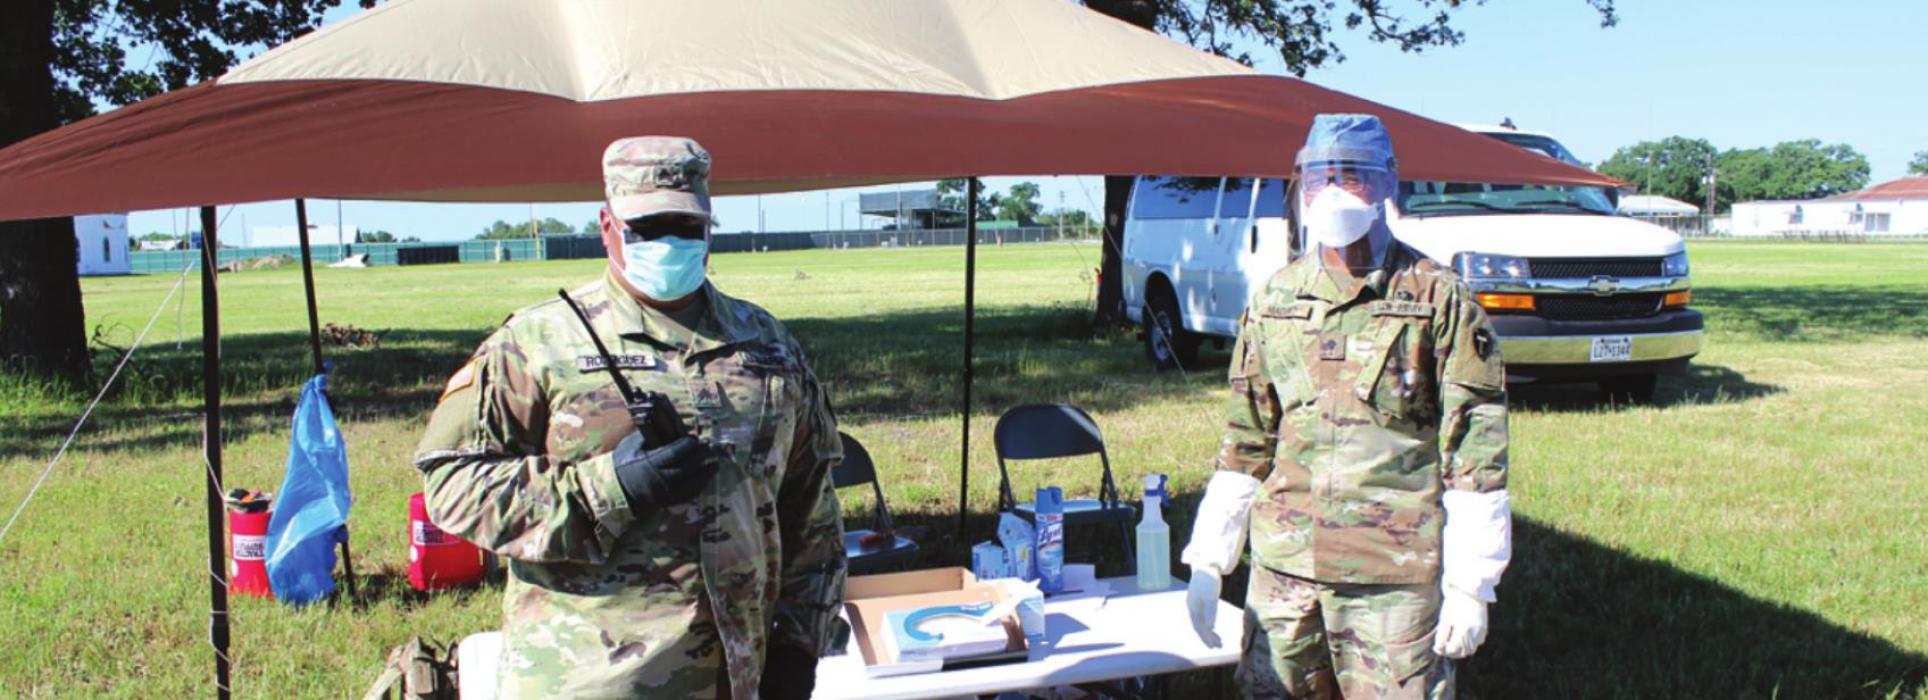 Two members of the National Guard were stationed near the entry to the fairgrounds to assist attendees at Friday’s testing event. Photos by Jeff Wick